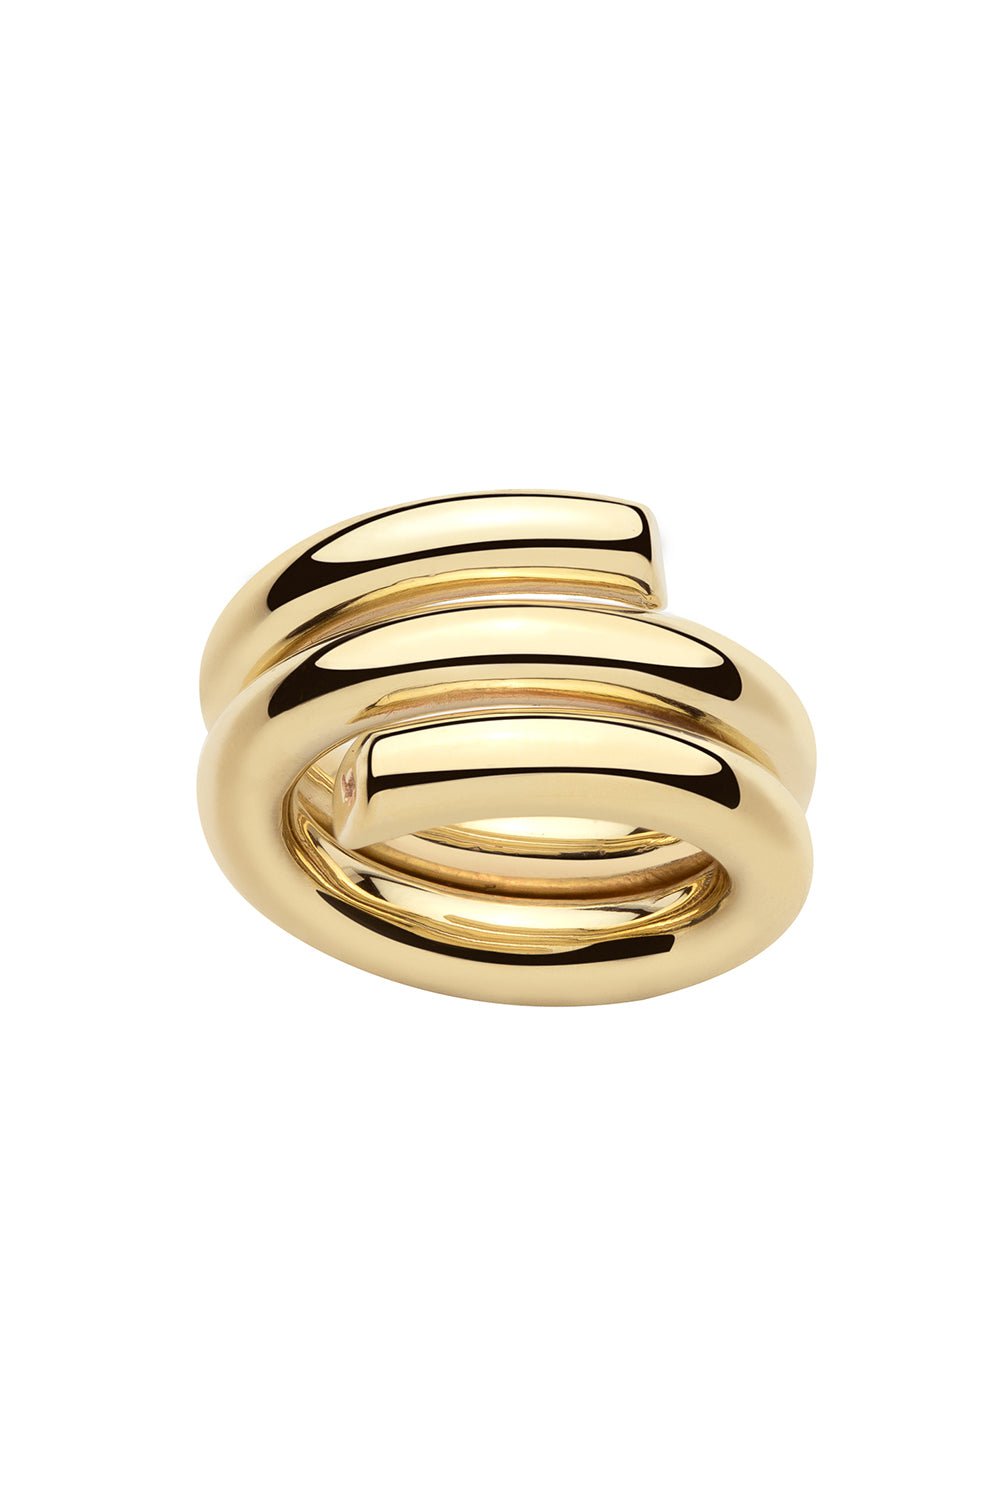 JENNIFER FISHER-Lilly Coil Ring-YELLOW GOLD